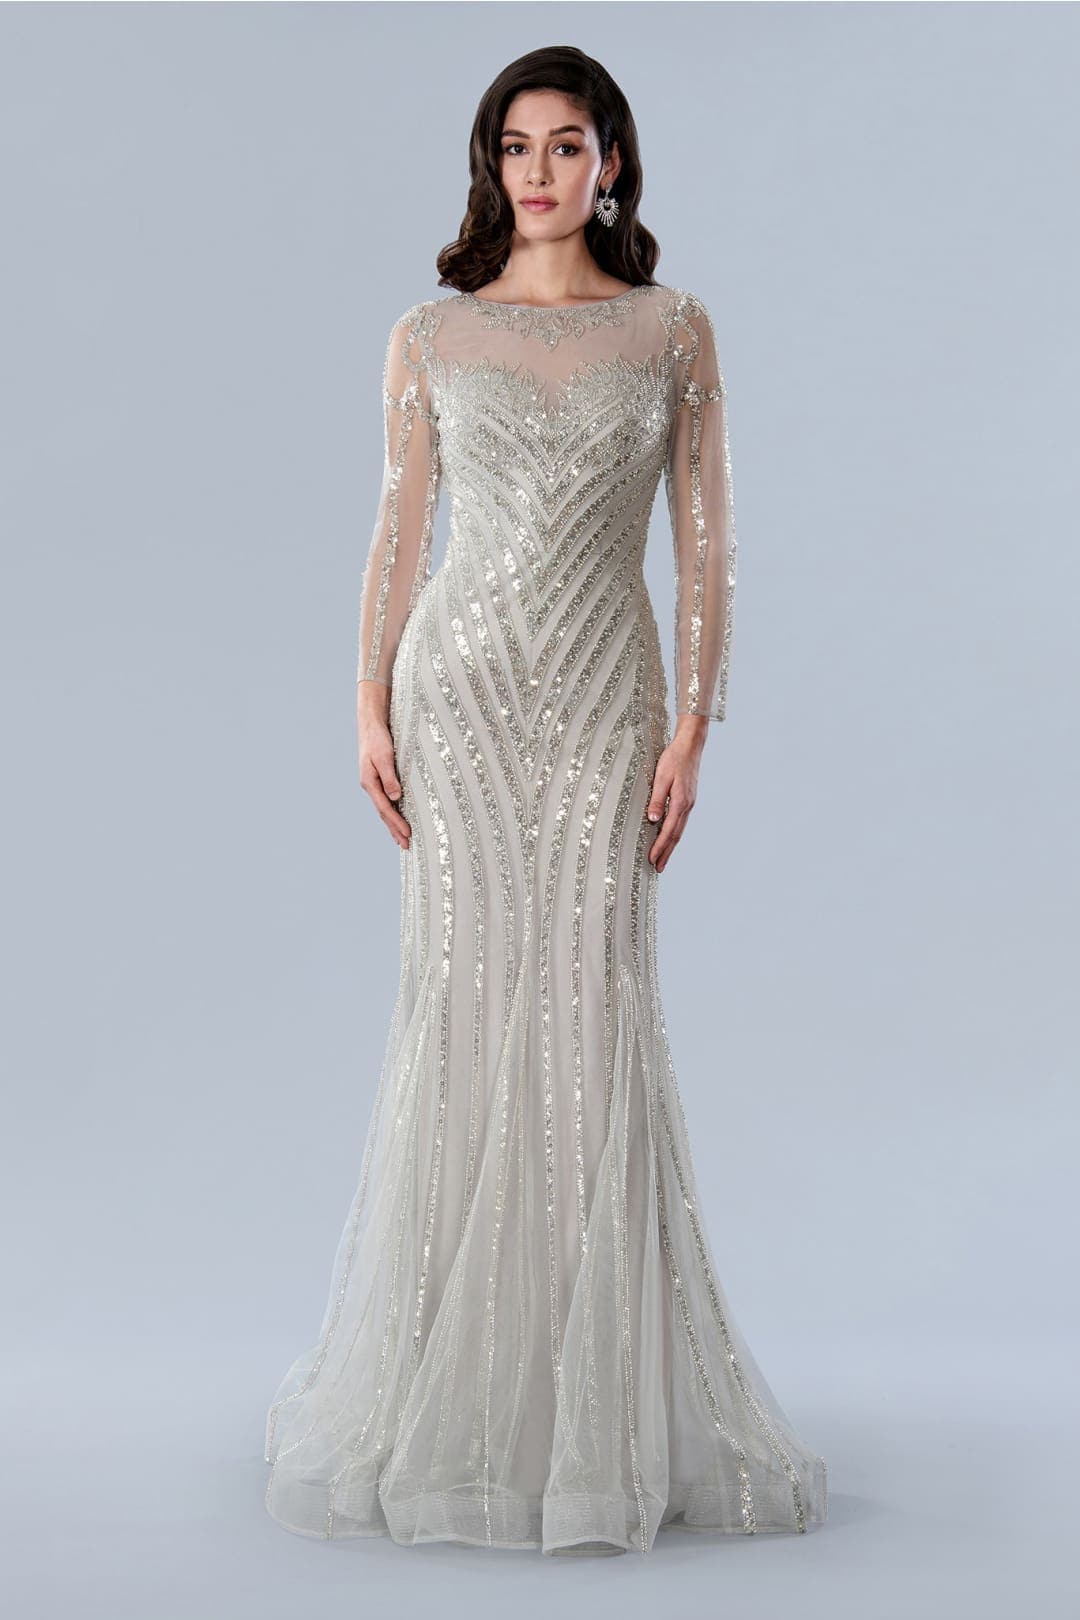 MAC DUGGAL Long-Sleeve Embellished Sequin Gown - Macy's